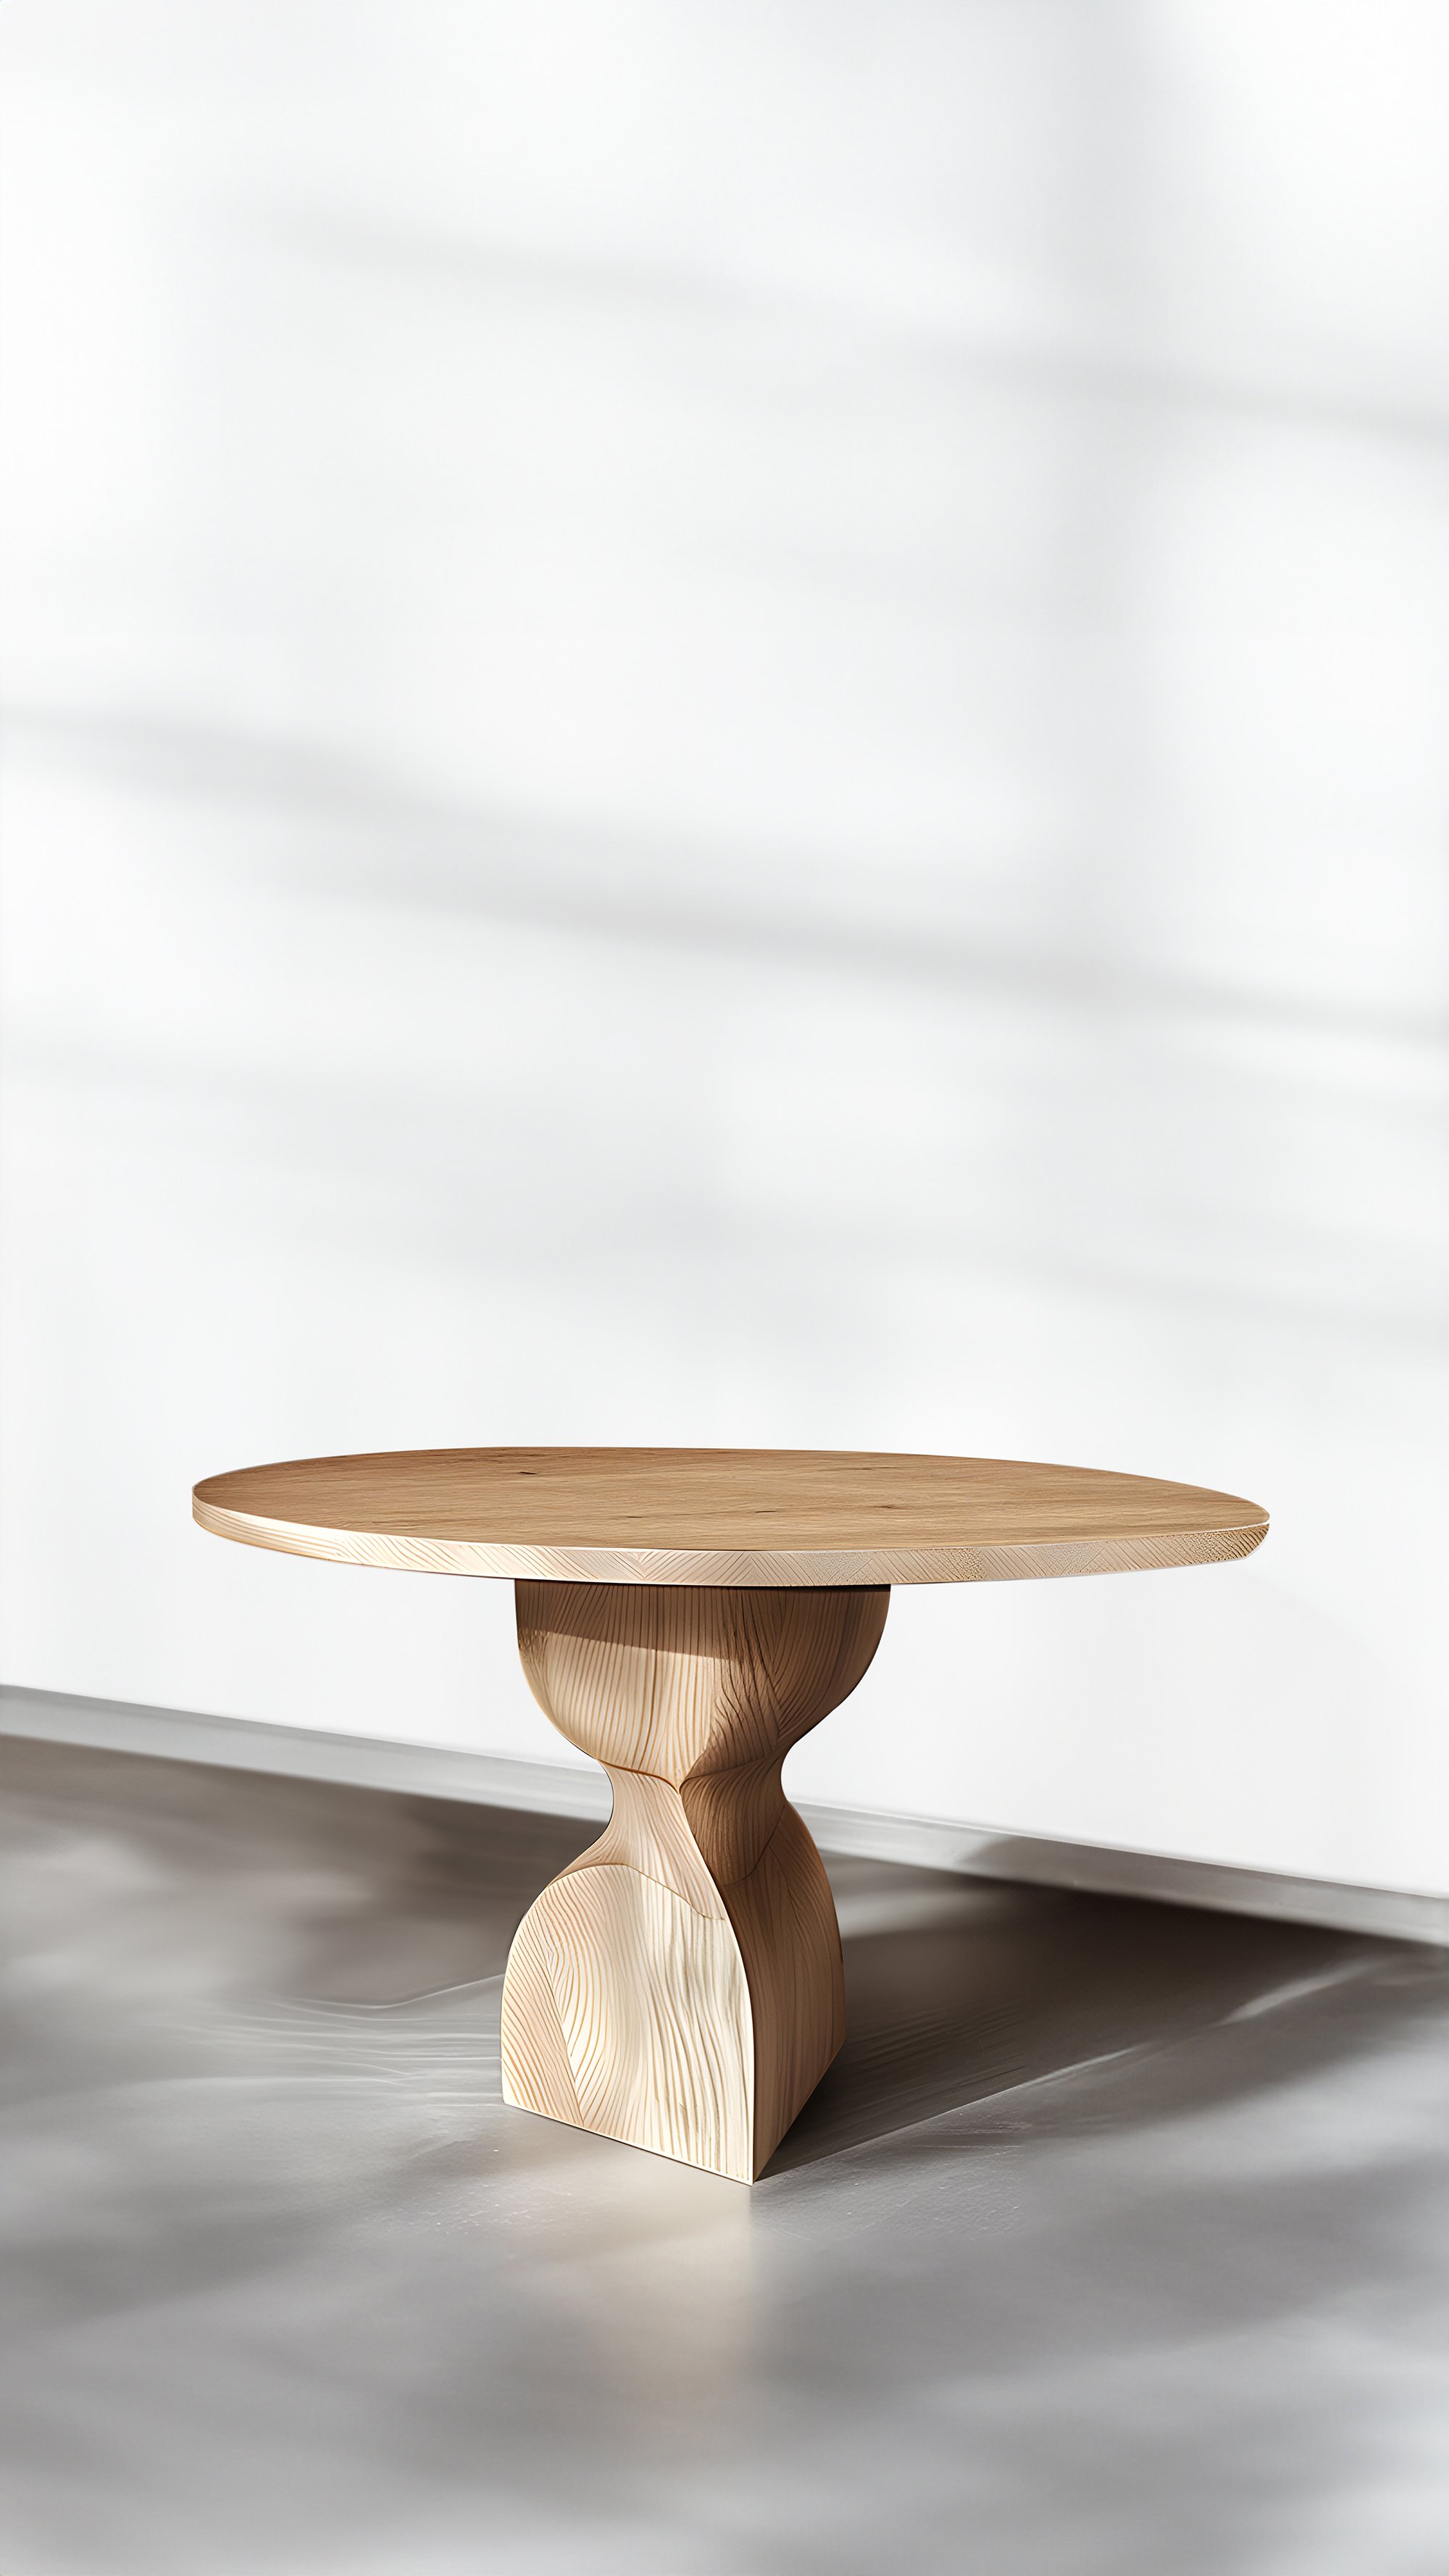 Game Tables by Socle No17, NONO Design, Solid Wood Play - 7.jpg